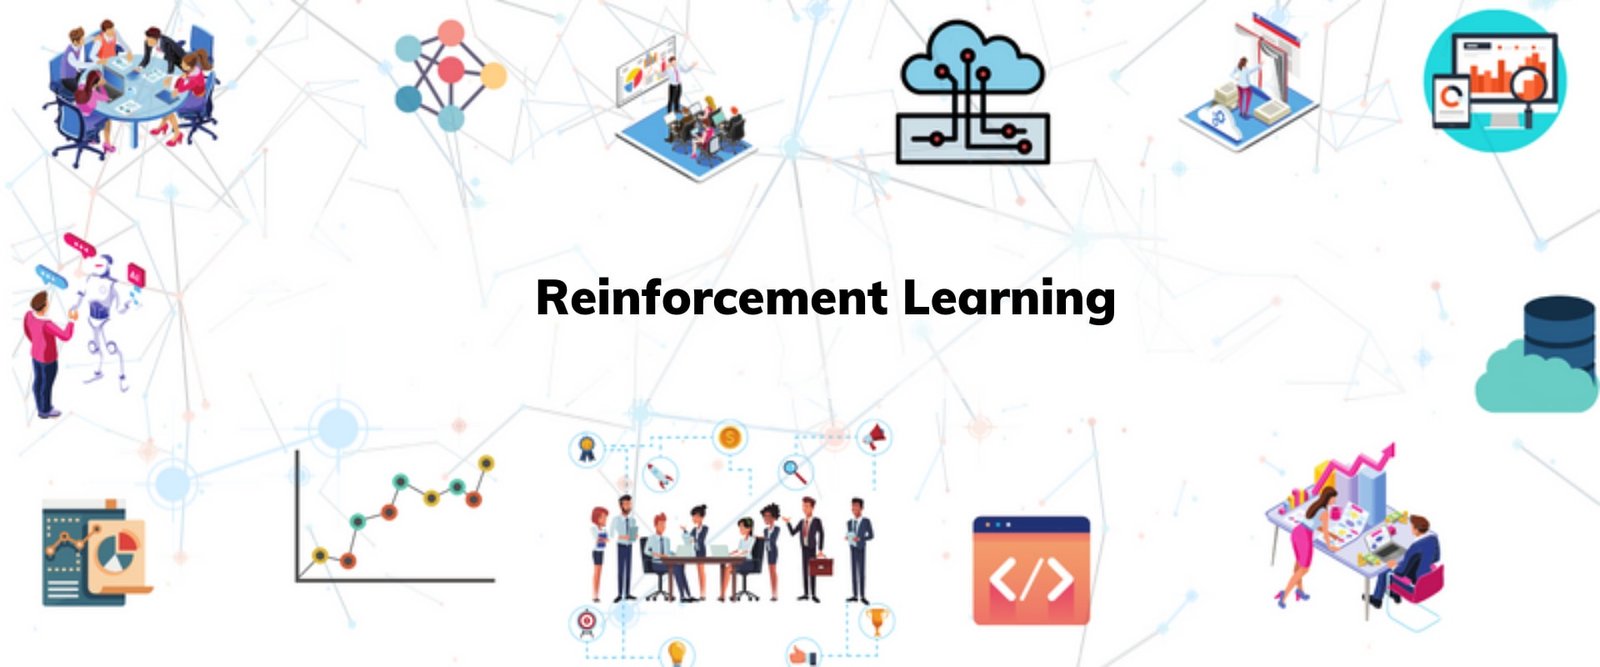 Reinforcement Learning - Pianalytix - Build Real-World Tech Projects